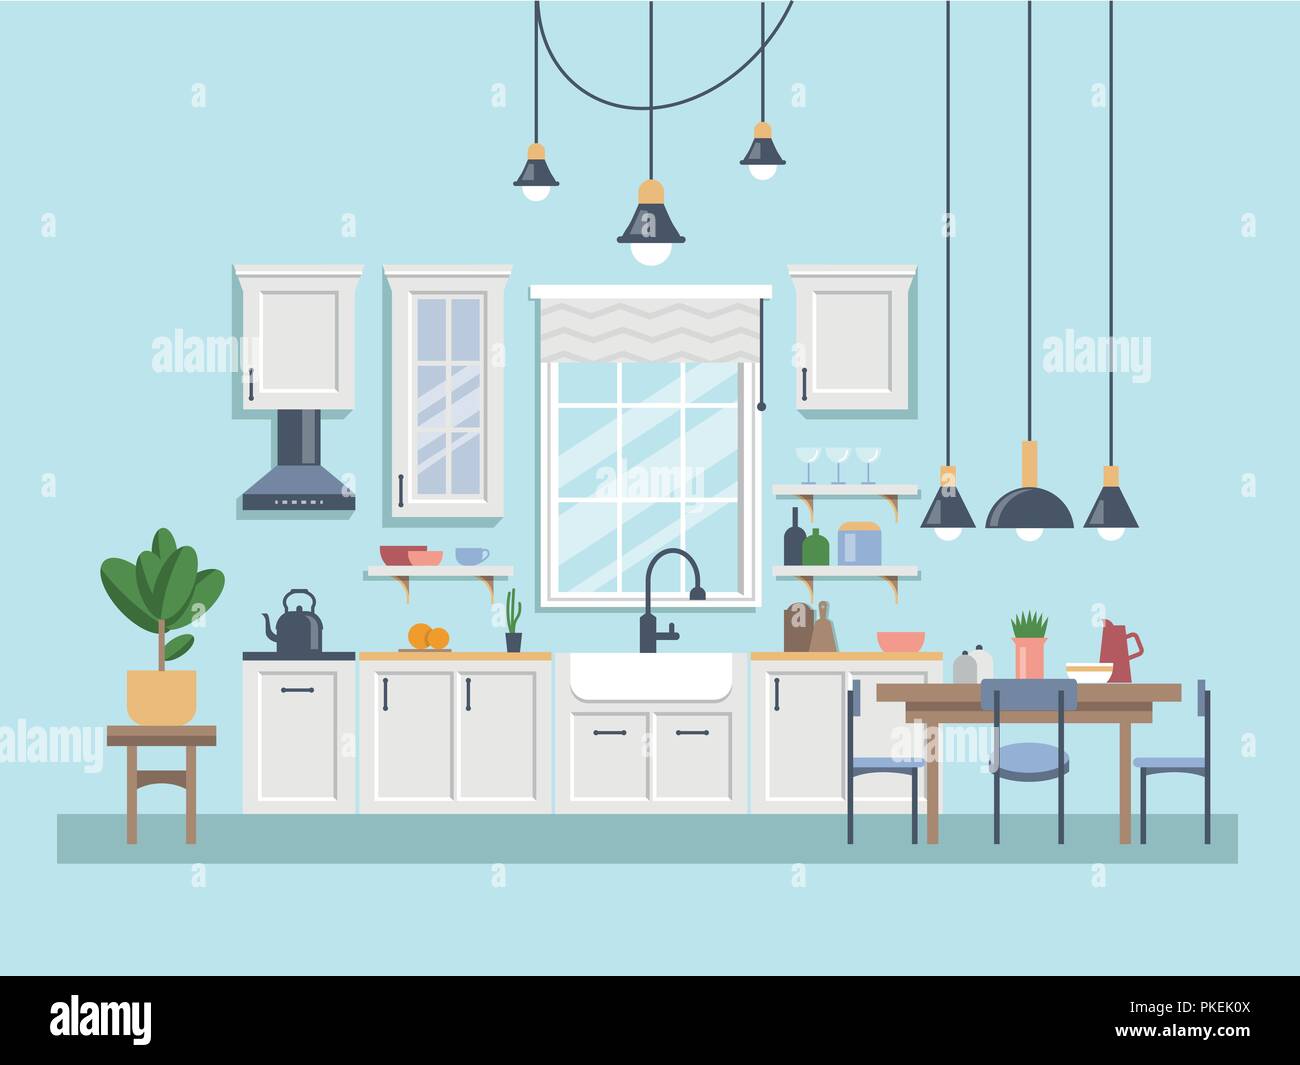 Interior of kitchen with dining area Modern design Stock Vector